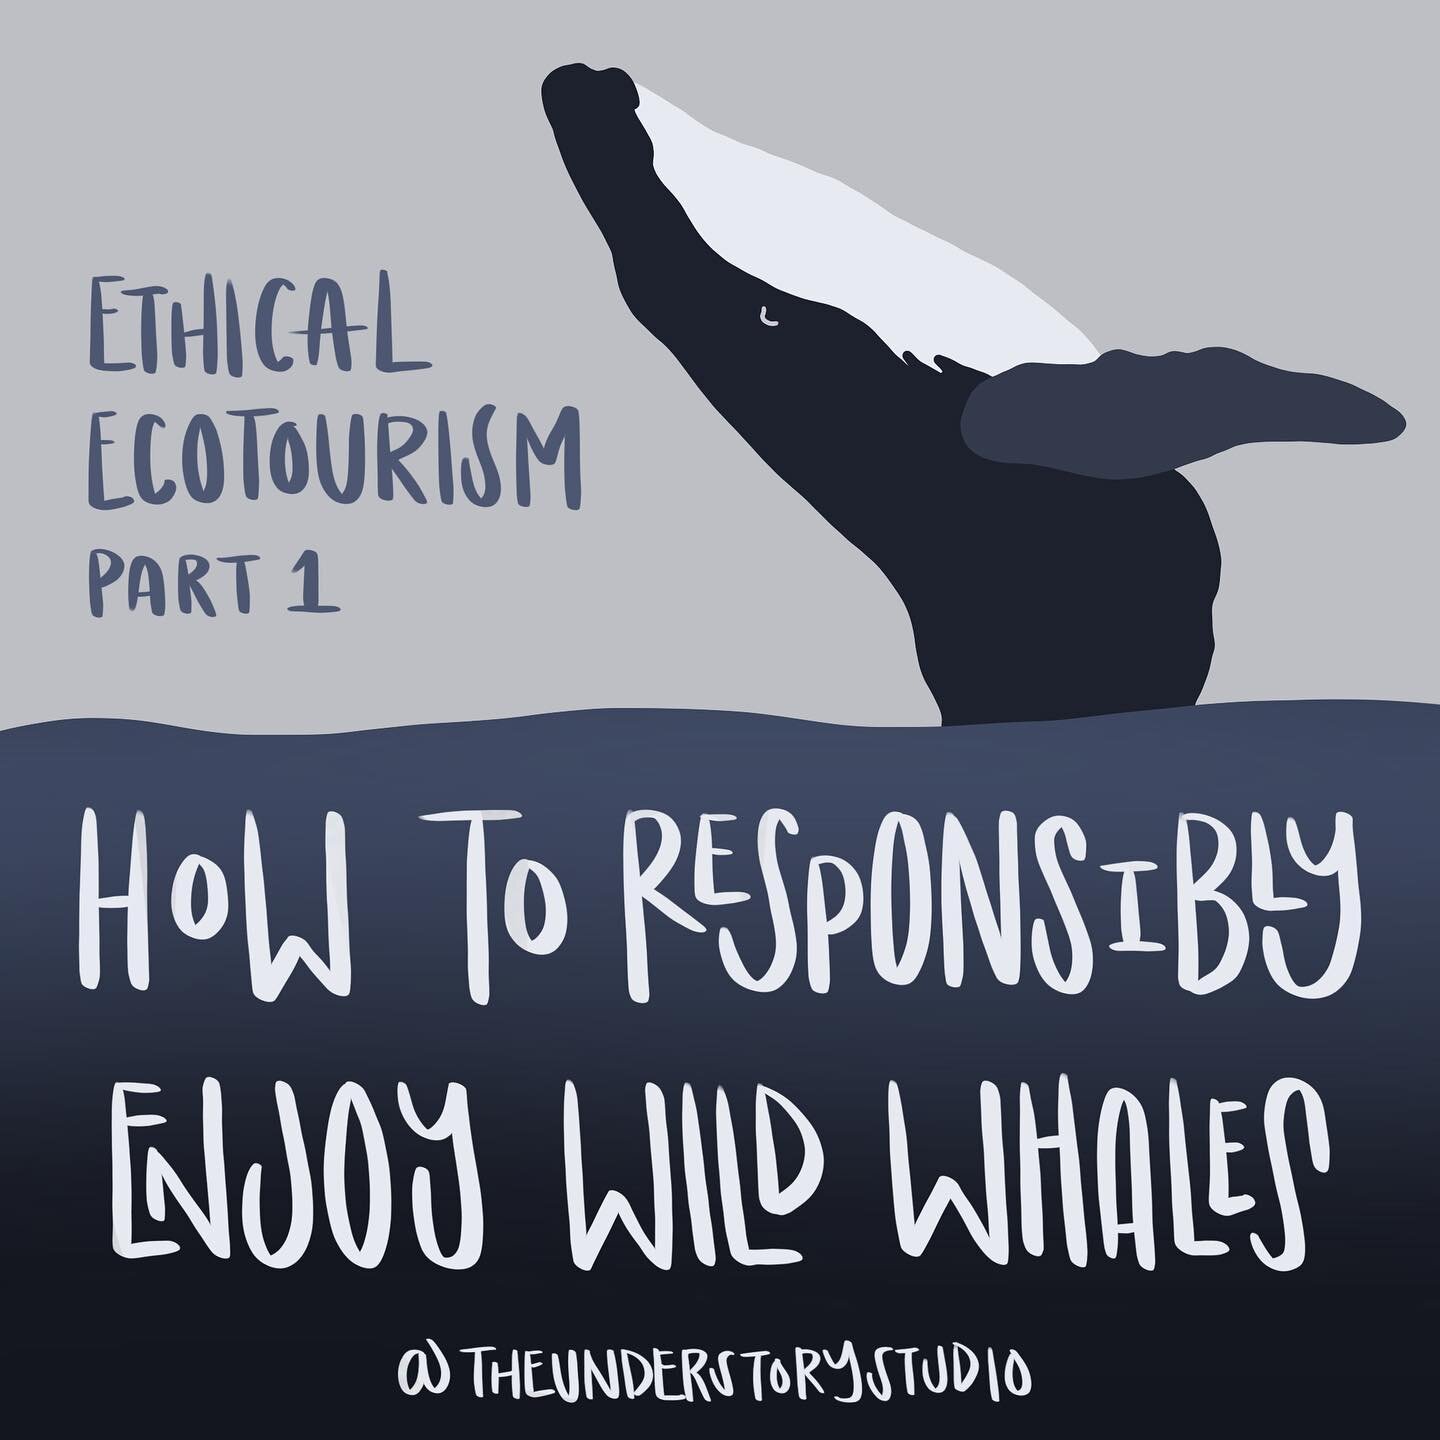 Ecotourism can be an engaging, exciting way to experience nature. But how do we know we are recreating ethically with conservation as a priority? That&rsquo;s what this series is all about, and we&rsquo;re kicking off part 1 with whale watching! 

Wh